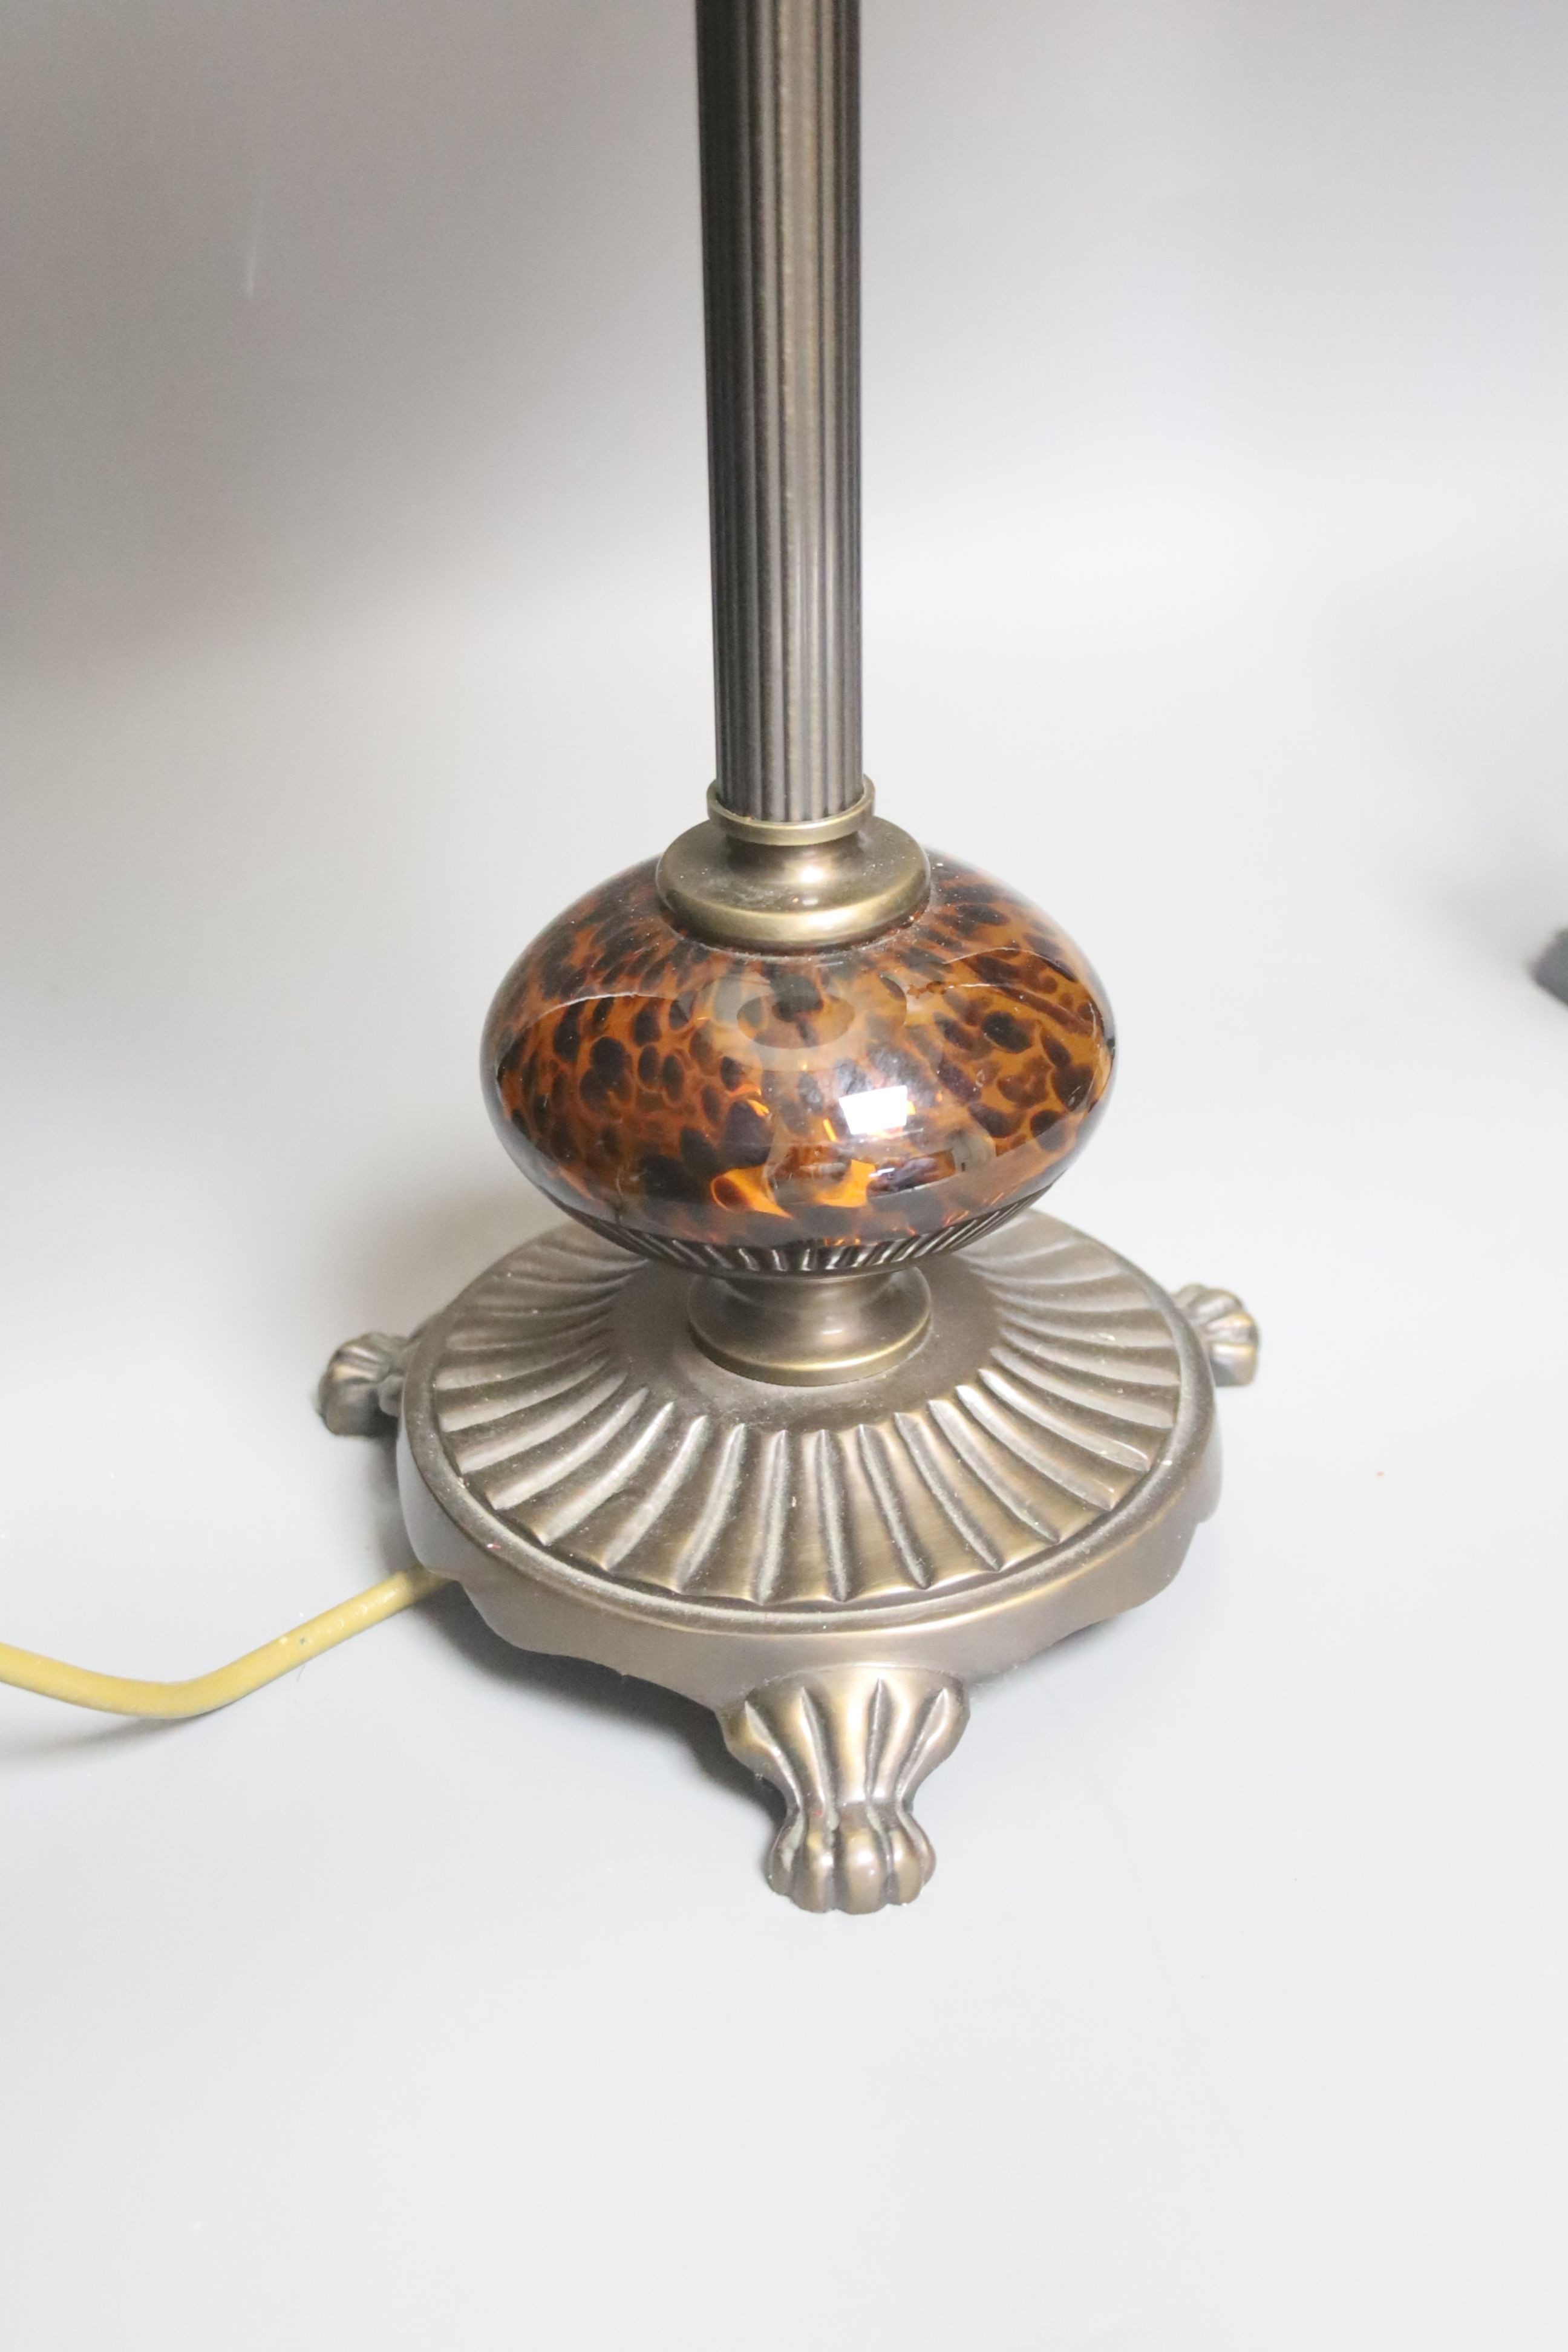 A bronze table lamp with mottled brown glass fitting and a chromed adjustable lamp